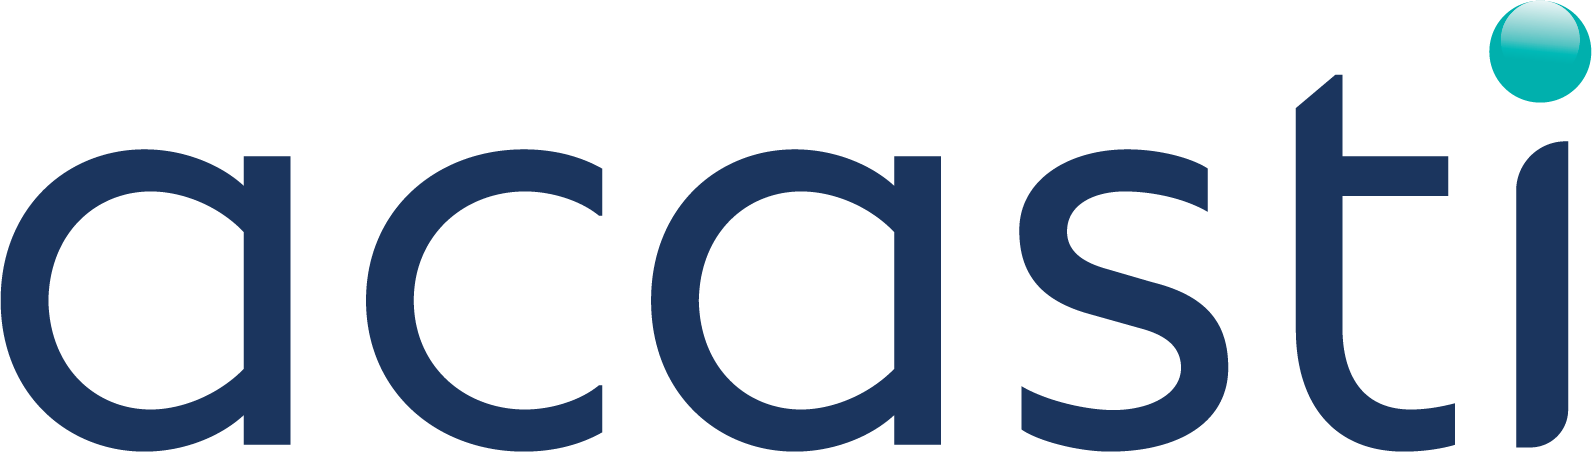 Acasti Pharma Announces Preliminary Topline Results Met All Primary Outcome Measures in the Single Dose Pharmacokinetic Study for GTX-101, the Company’s Drug Candidate for the Treatment of Postherpetic Neuralgia (PHN)